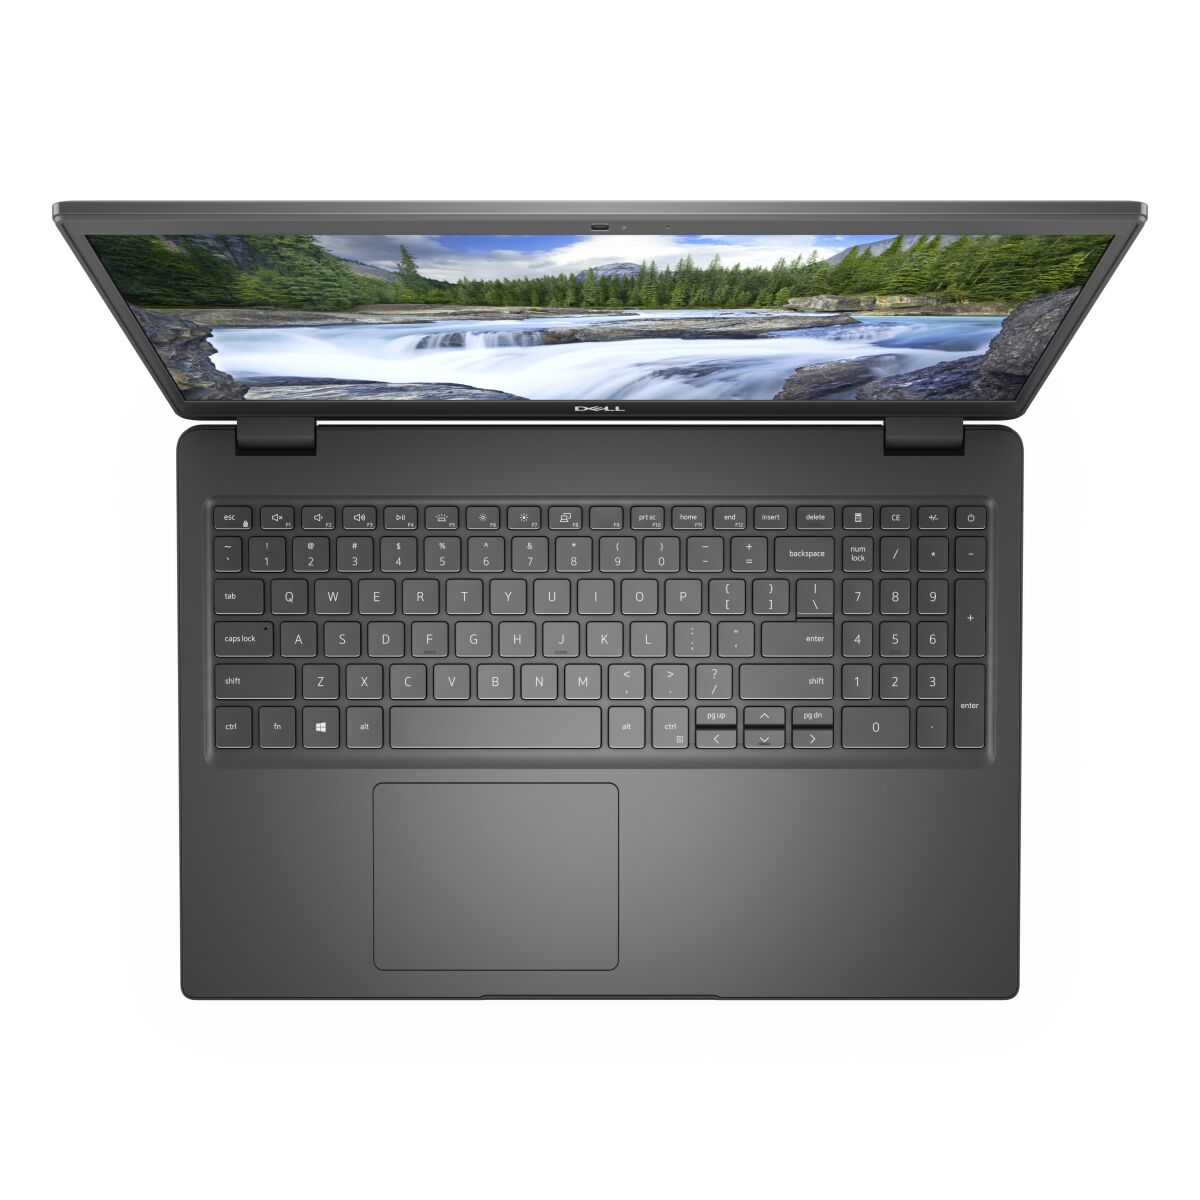 DELL Latitude 3510 - 8X2KP laptop specifications